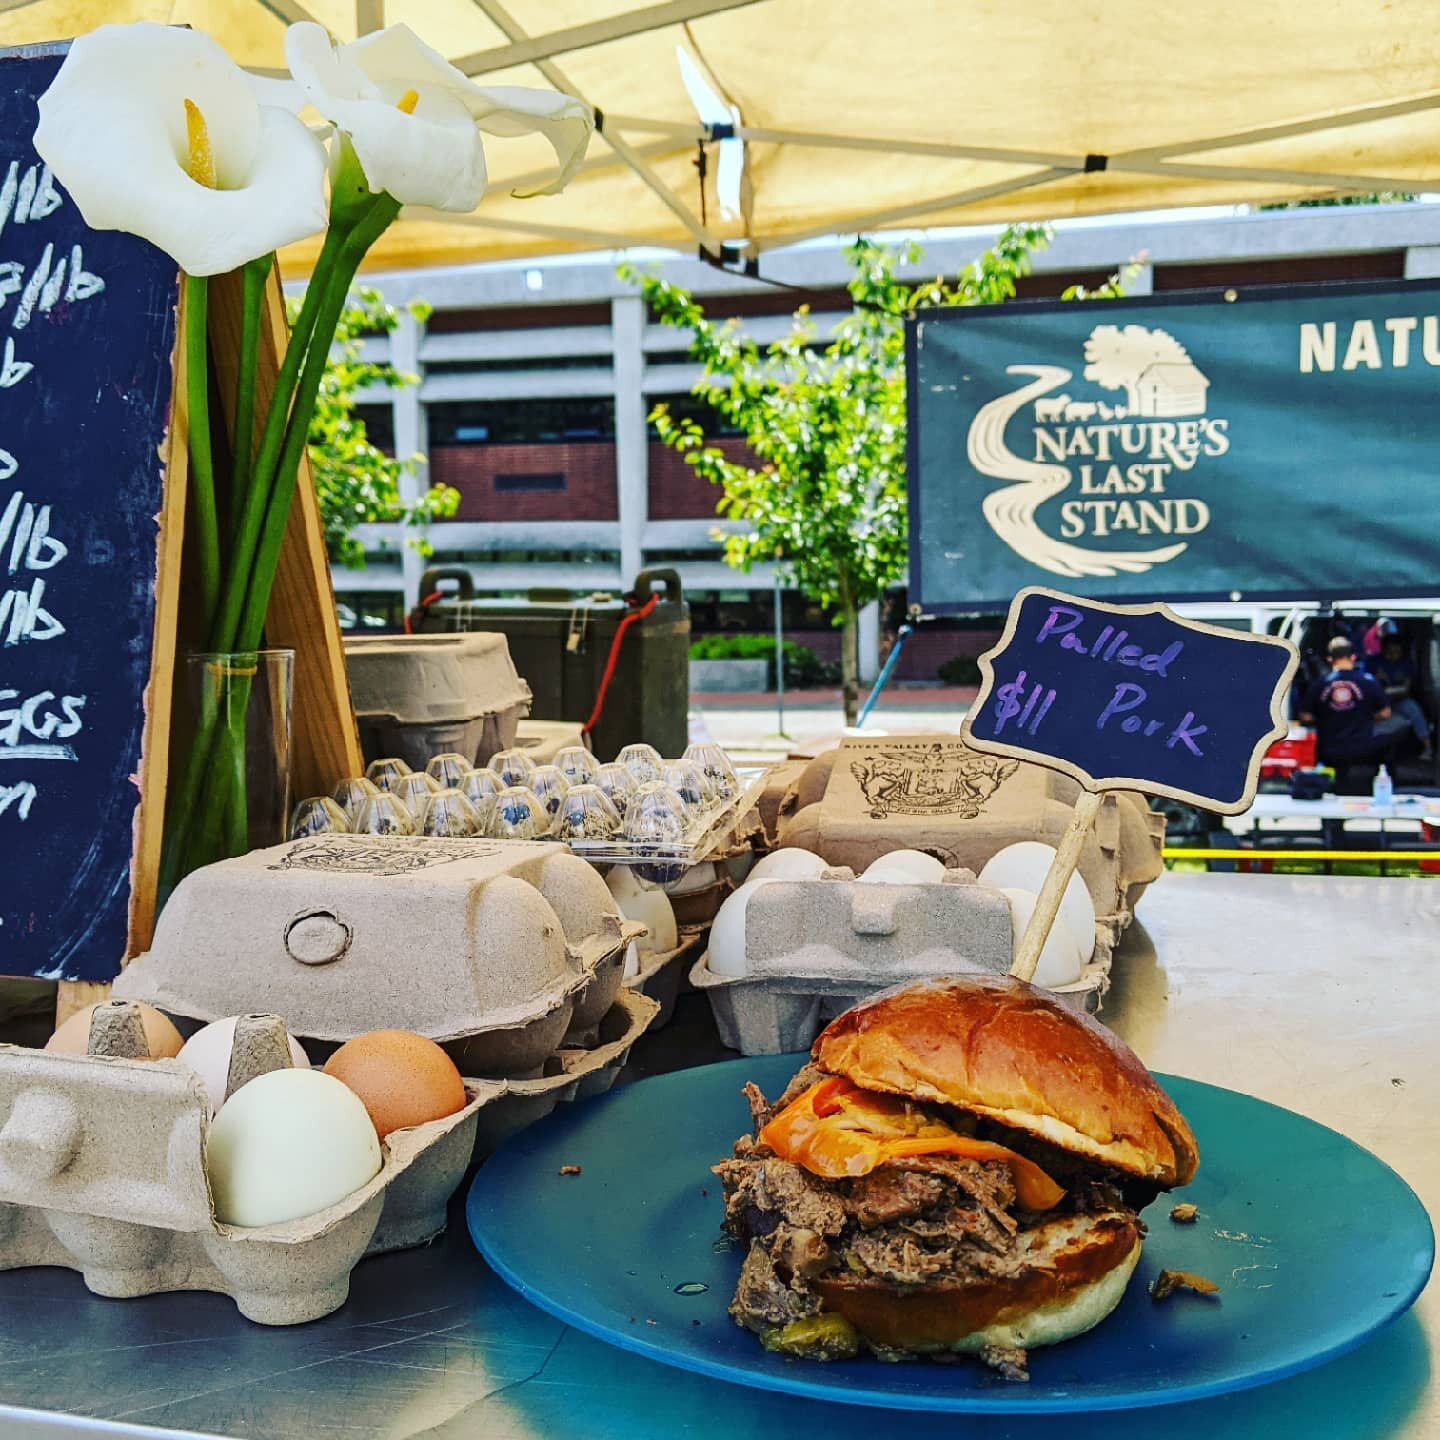 Join us now until 7:30PM at the Queen Anne Farmers Market! Try our pulled pork sandwich for dinner, and grab eggs, sausage and butchered cuts for meals this weekend. 

#seattle #farmersmarket #pulledpork #porksausage #lambsausage #groundbeef #chicken